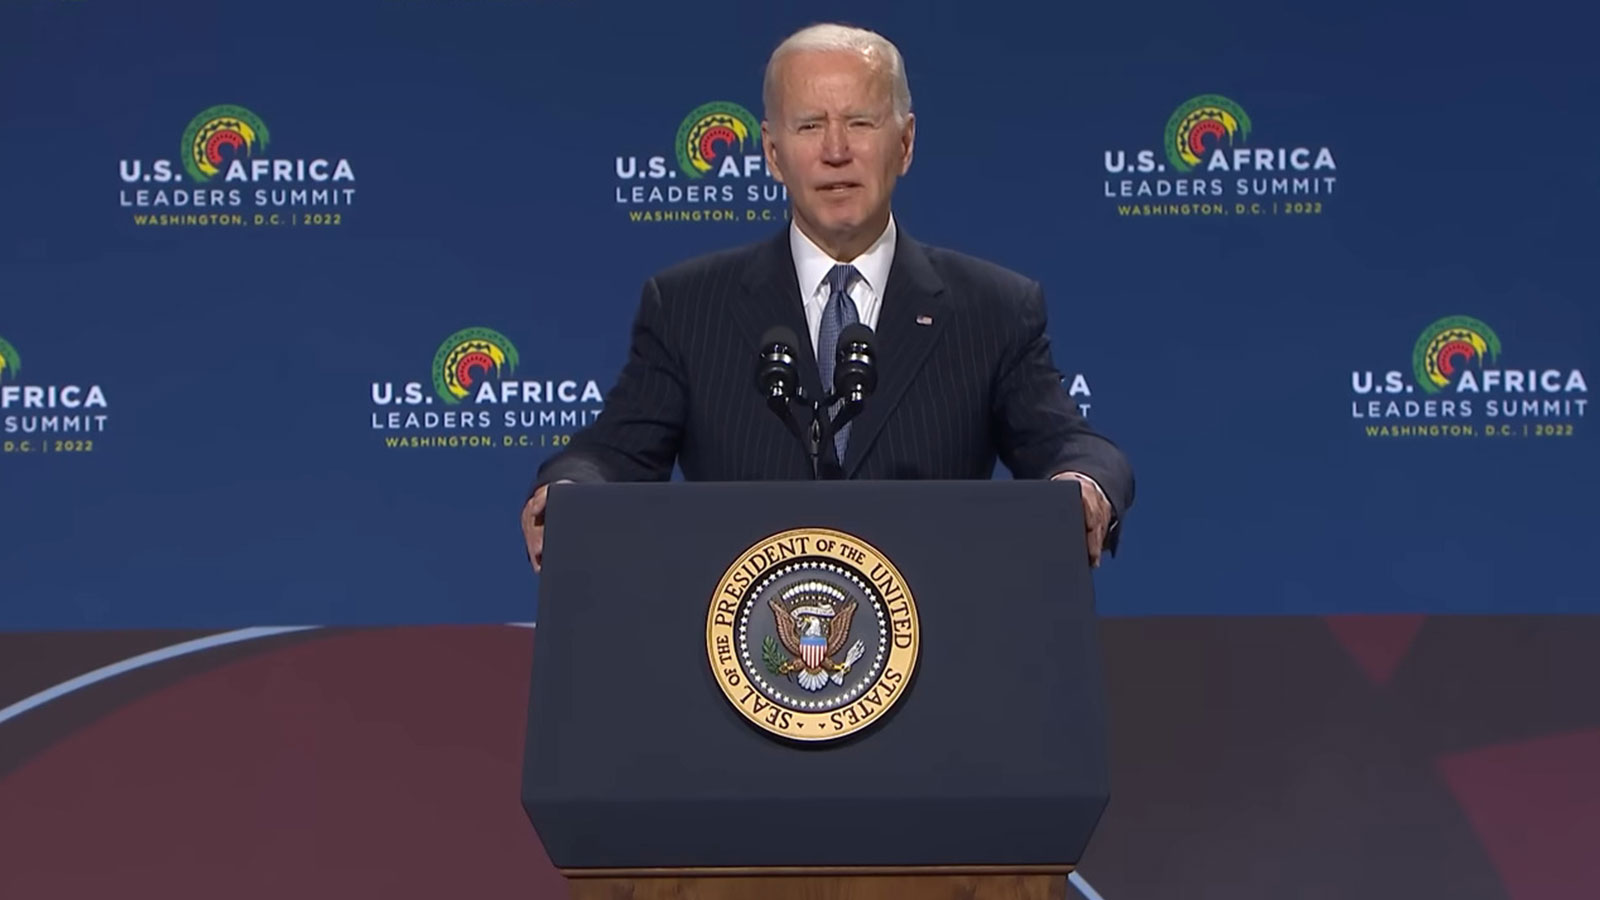 Statement by Dr. Ron Daniels on President Biden’s apology for American slavery